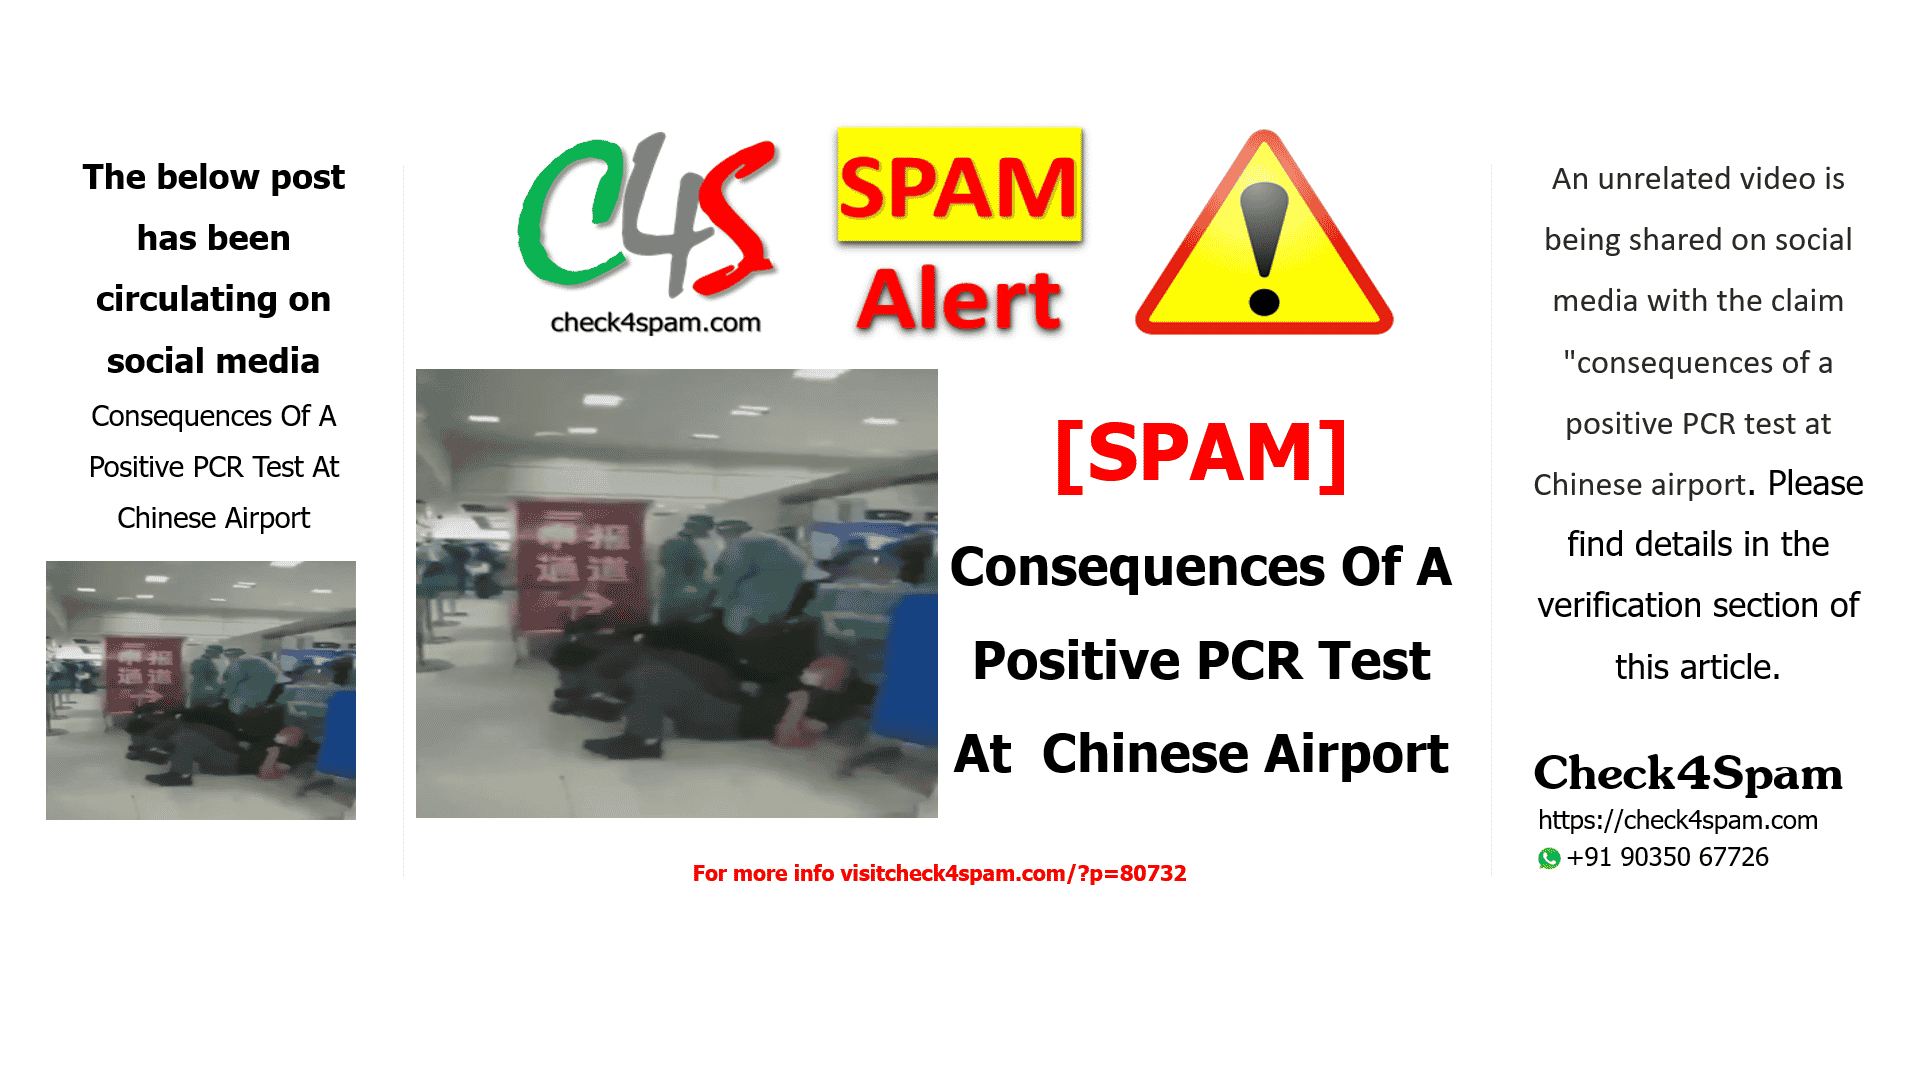 Consequences Of A Positive PCR Test At Chinese Airport